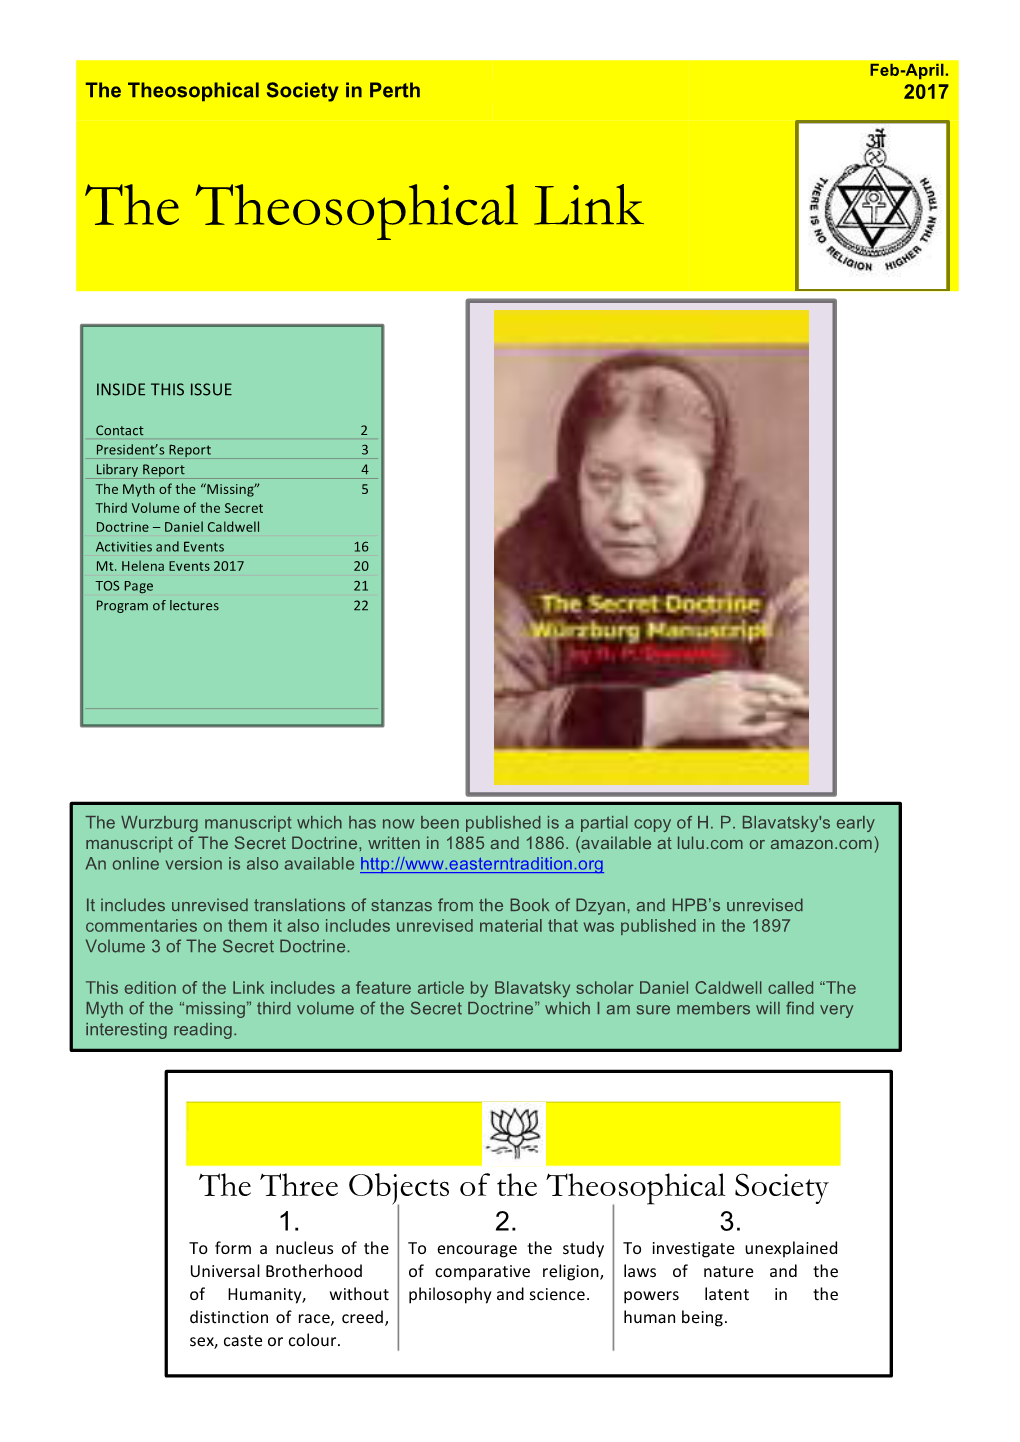 The Theosophical Link